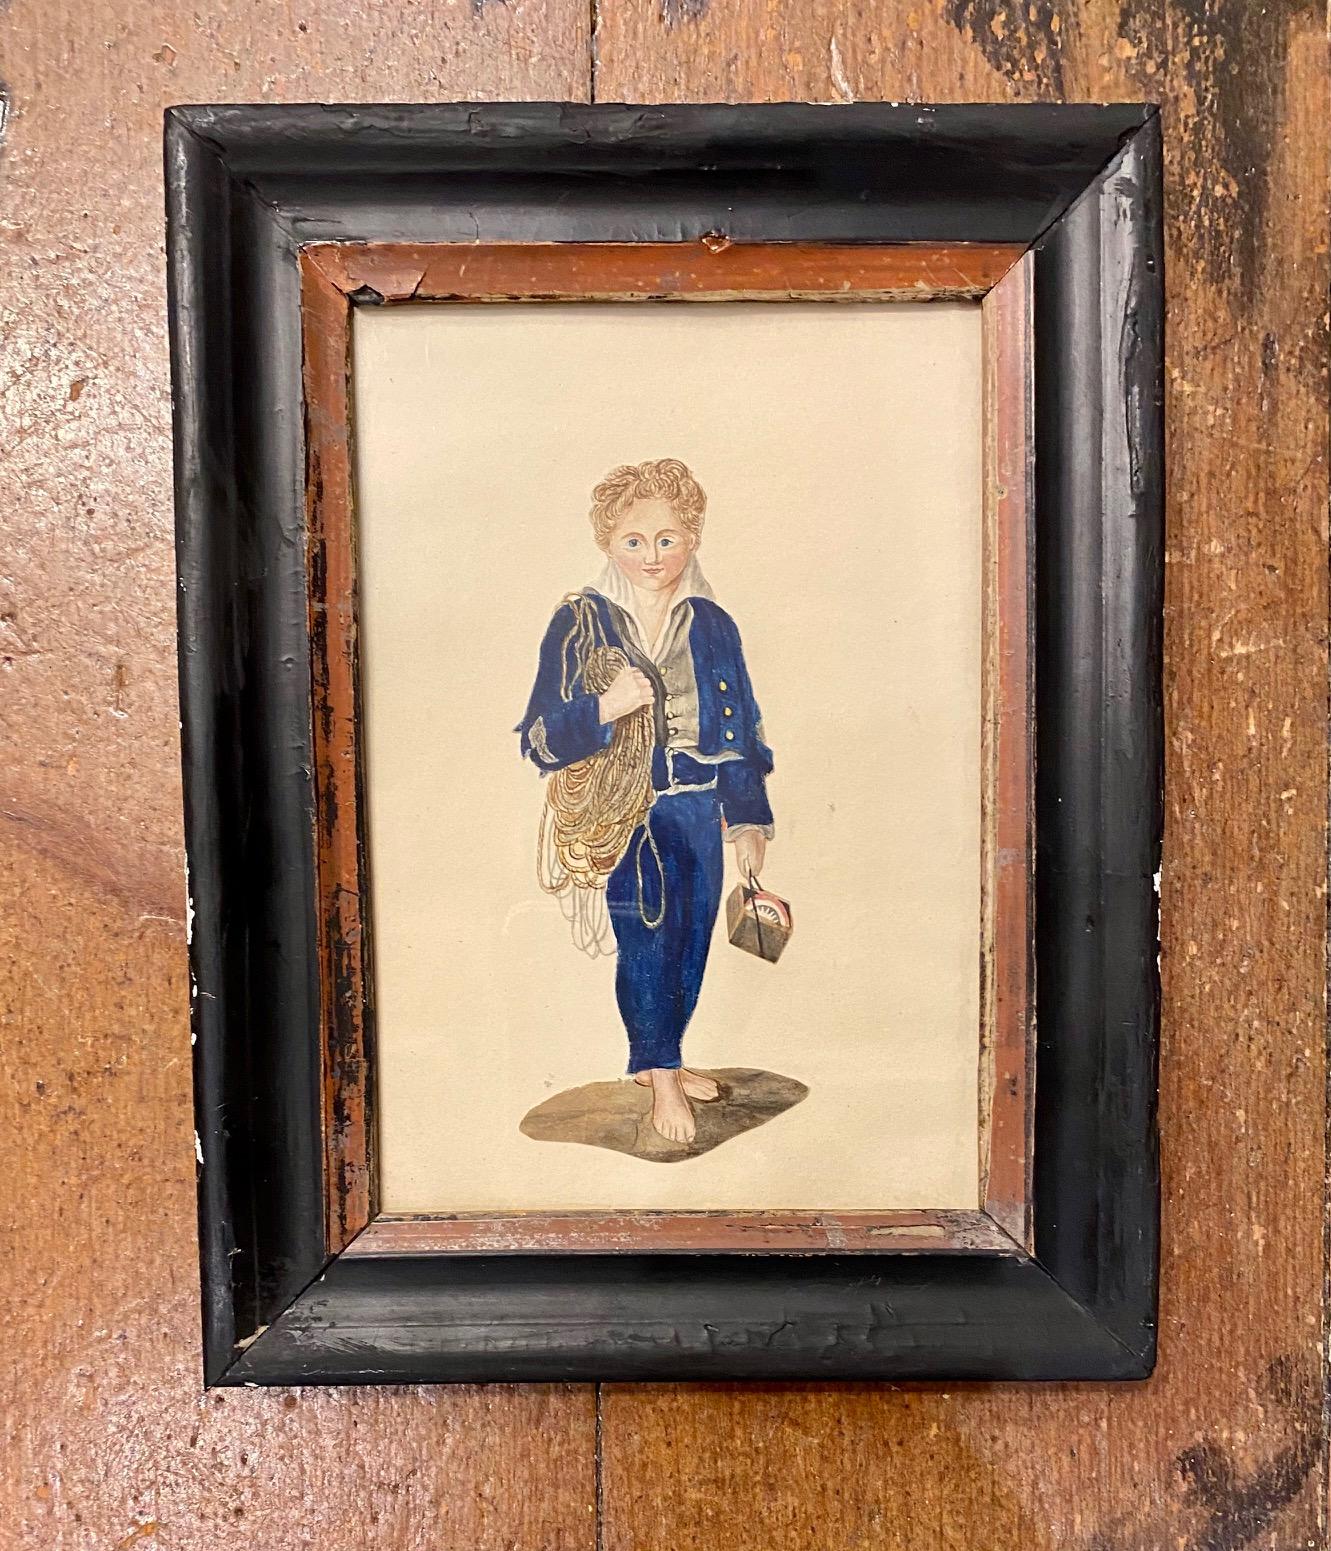 Early 19th century watercolor of a Sailor Boy, a very unusual watercolor on thick paper or card, precisely cut-out and mounted on a background paper. The blond curly haired and blue eyed lad wears a rich blue midshipman's suit, holding a boxed